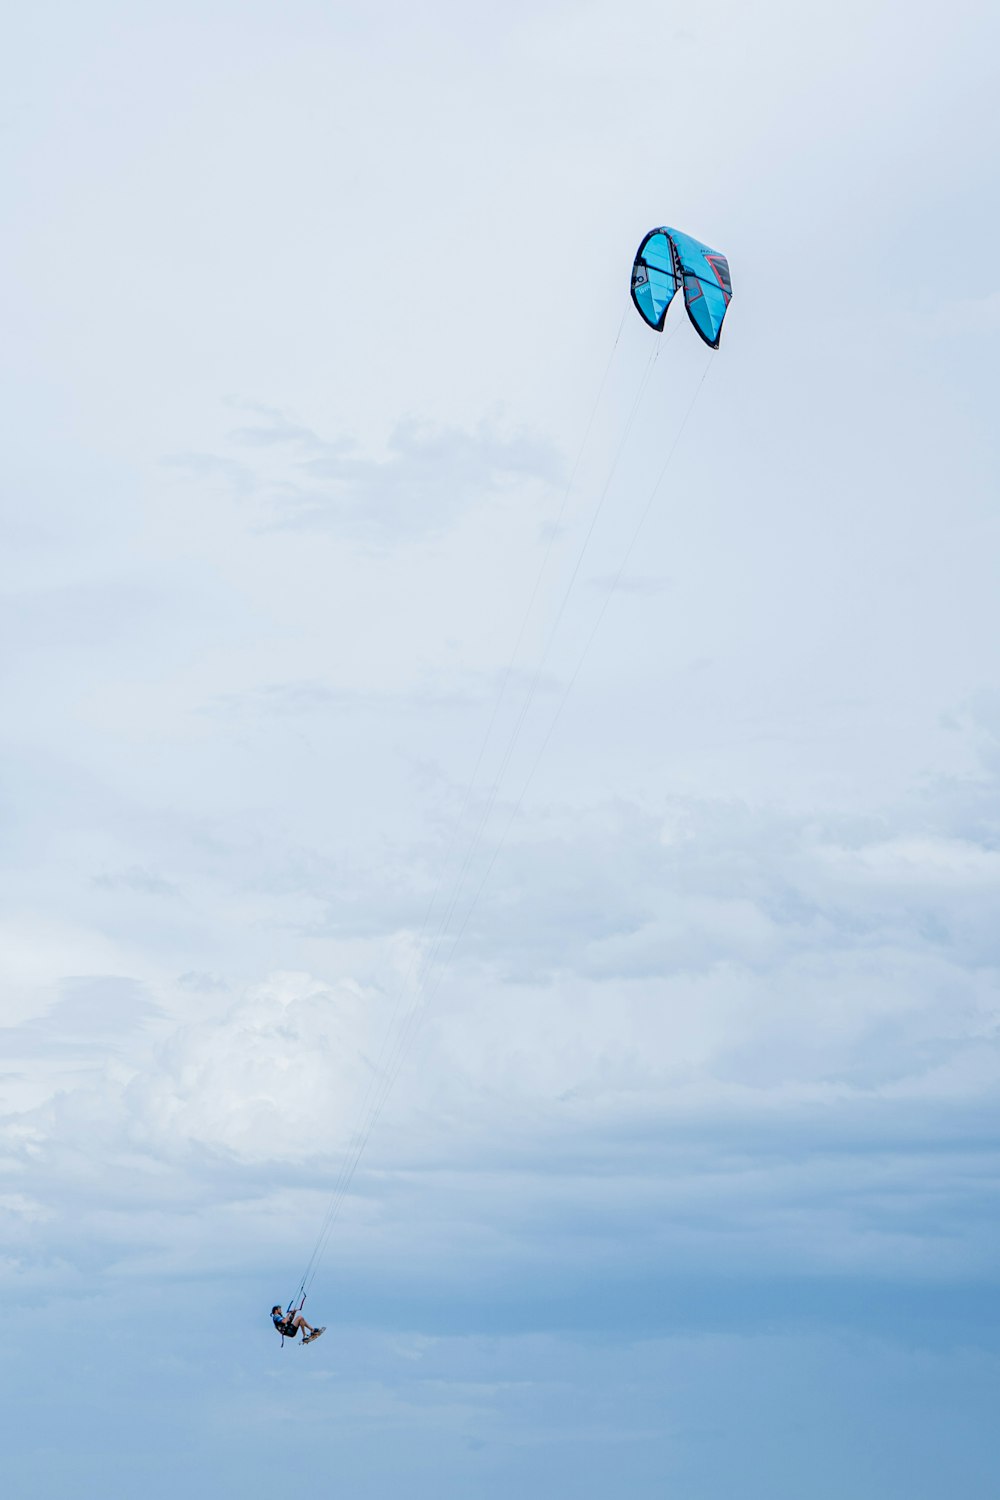 blue and yellow kite flying under white clouds during daytime